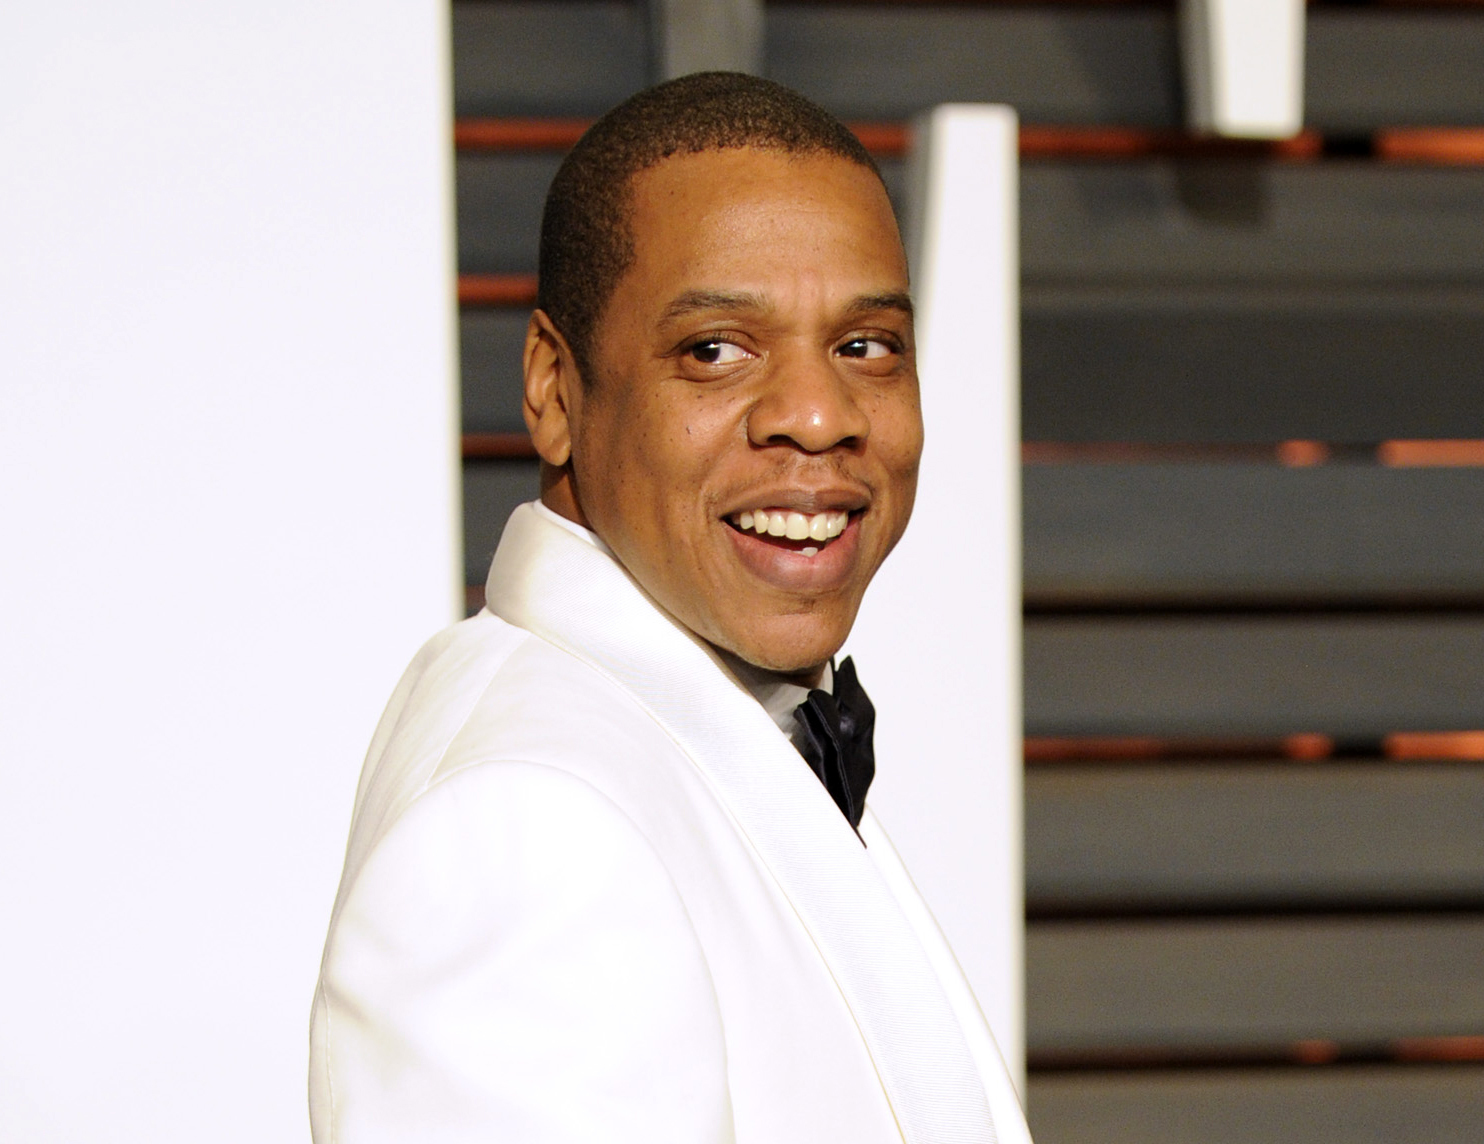 FILE - In this Feb. 22, 2015 file photo, Jay Z arrives at the 2015 Vanity Fair Oscar Party in Beverly Hills, Calif.  Jay Z, one of contemporary music’s most celebrated lyricists and entertainers, is one of the nominees for the 2017 Songwriters Hall of Fame, and if inducted he could become the first rapper to enter the prestigious music organization. The Songwriters Hall gave The Associated Press the list of nominees Thursday, Oct. 20, 2016 a day ahead of its official announcement. (Photo by Evan Agostini/Invision/AP, File)